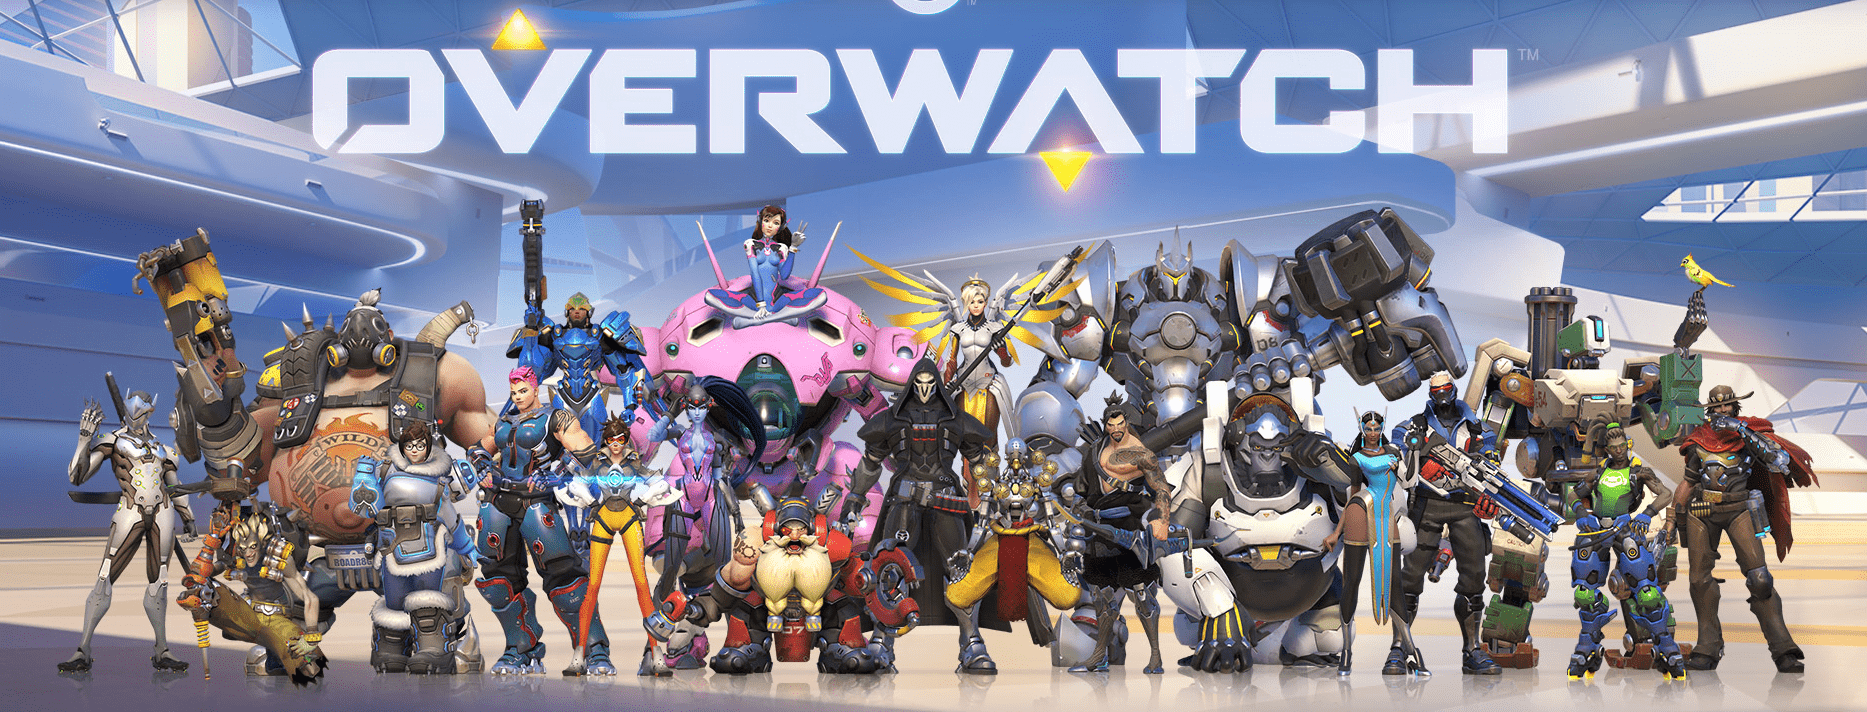 Overwatch Update Version 2.69 Full New Patch Notes PS4 Full Details Here 2019